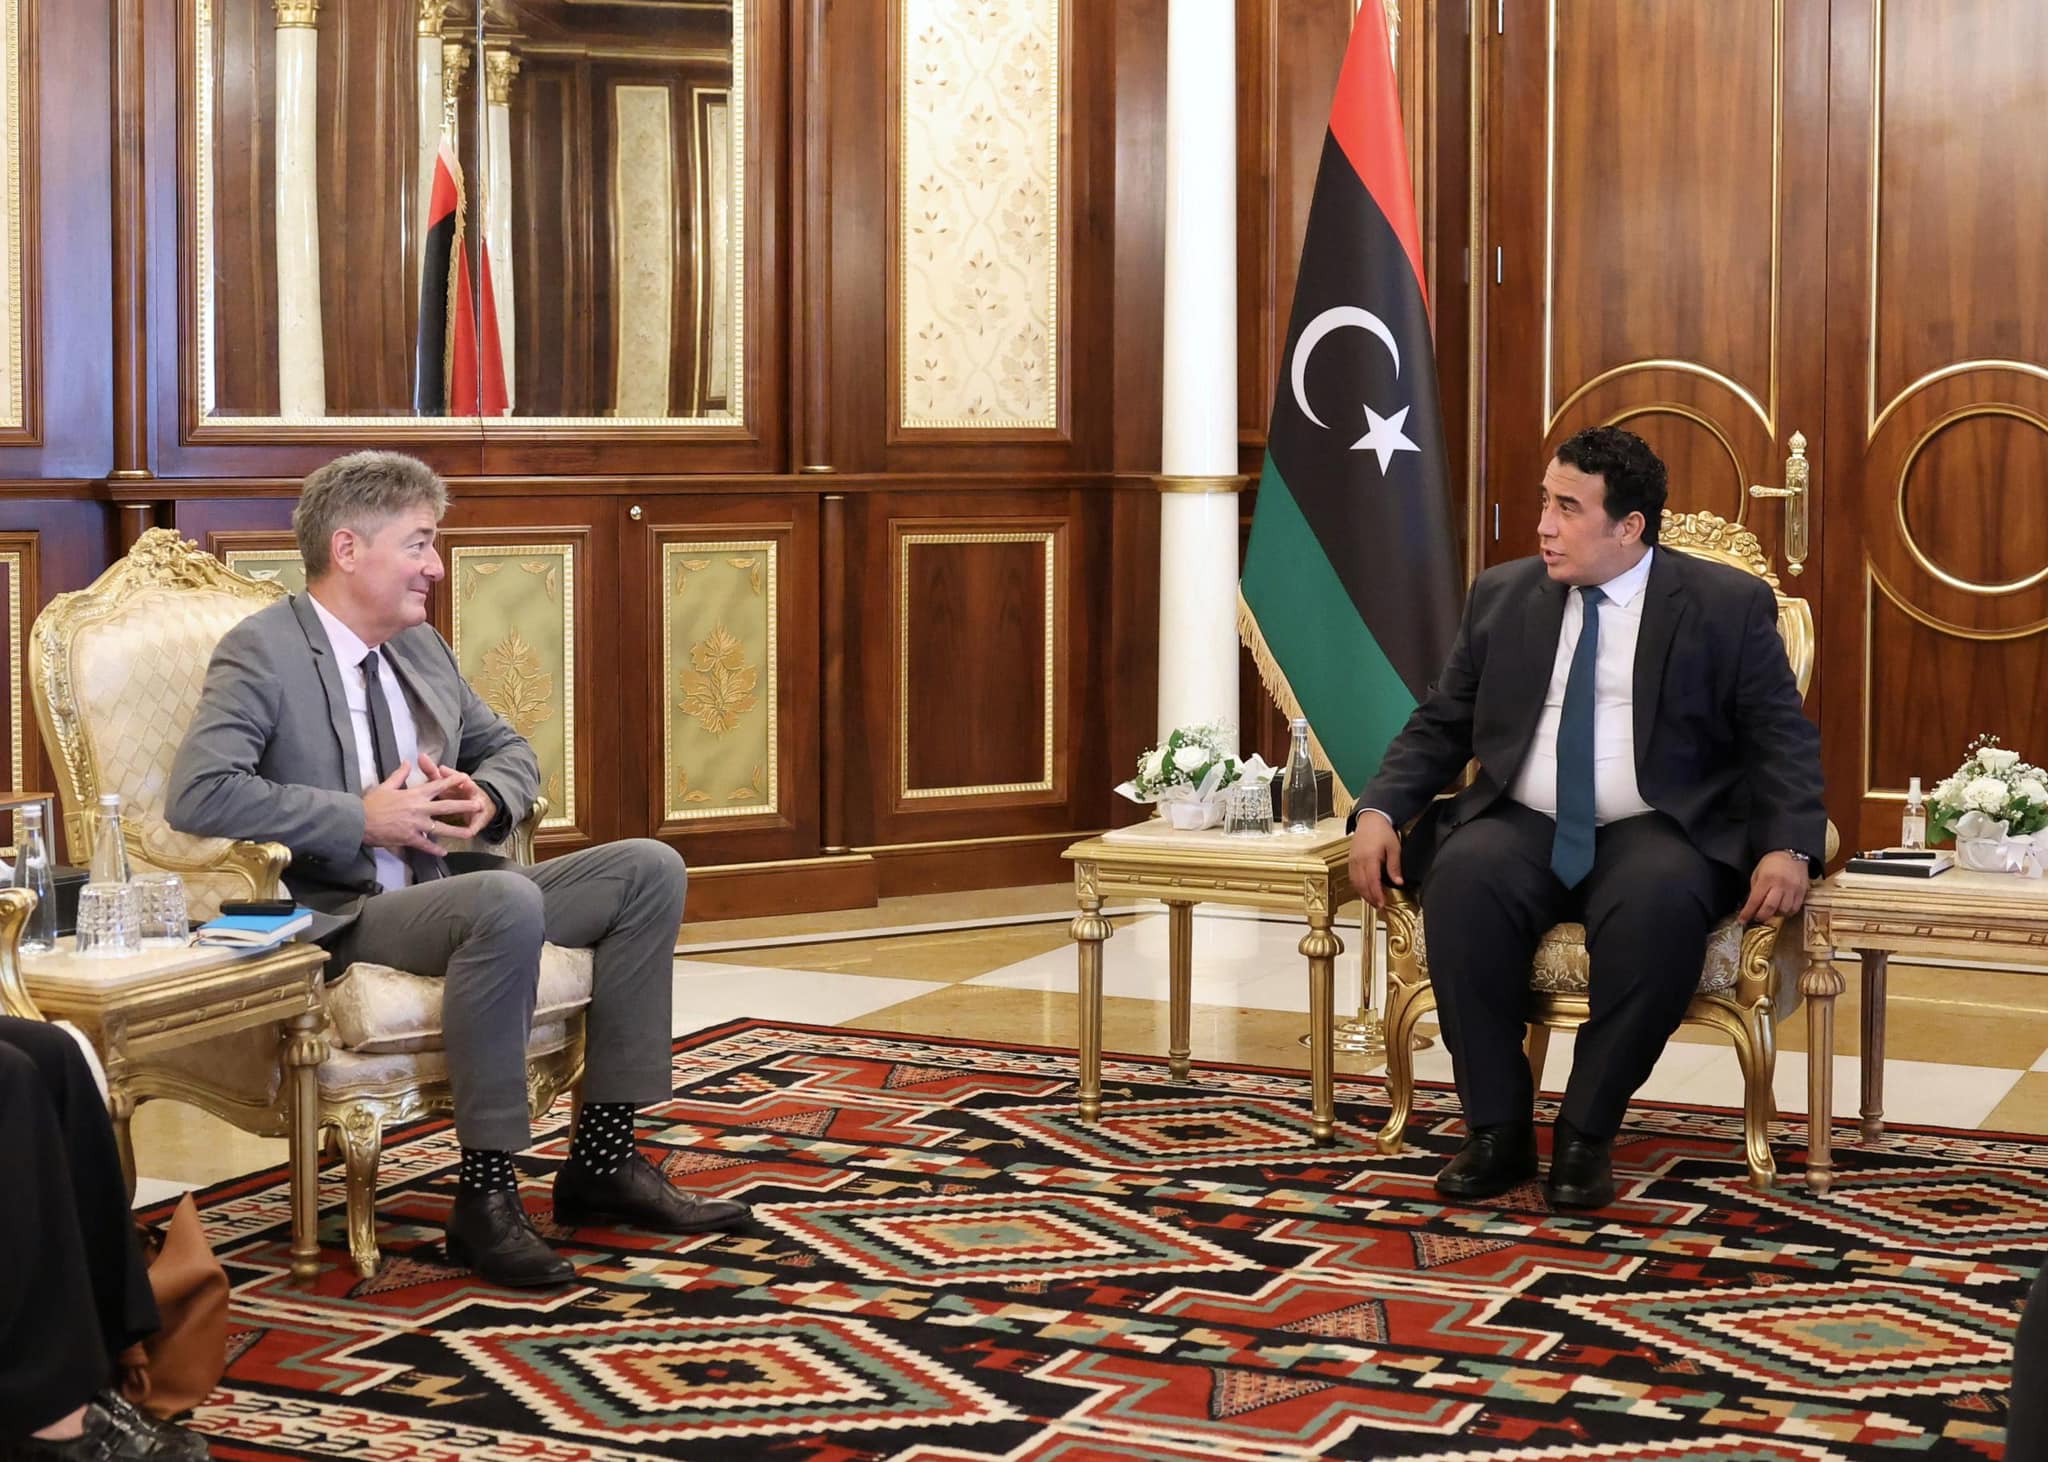 Al-Menfi receives the German ambassador to Libya on the occasion of the end of his work.